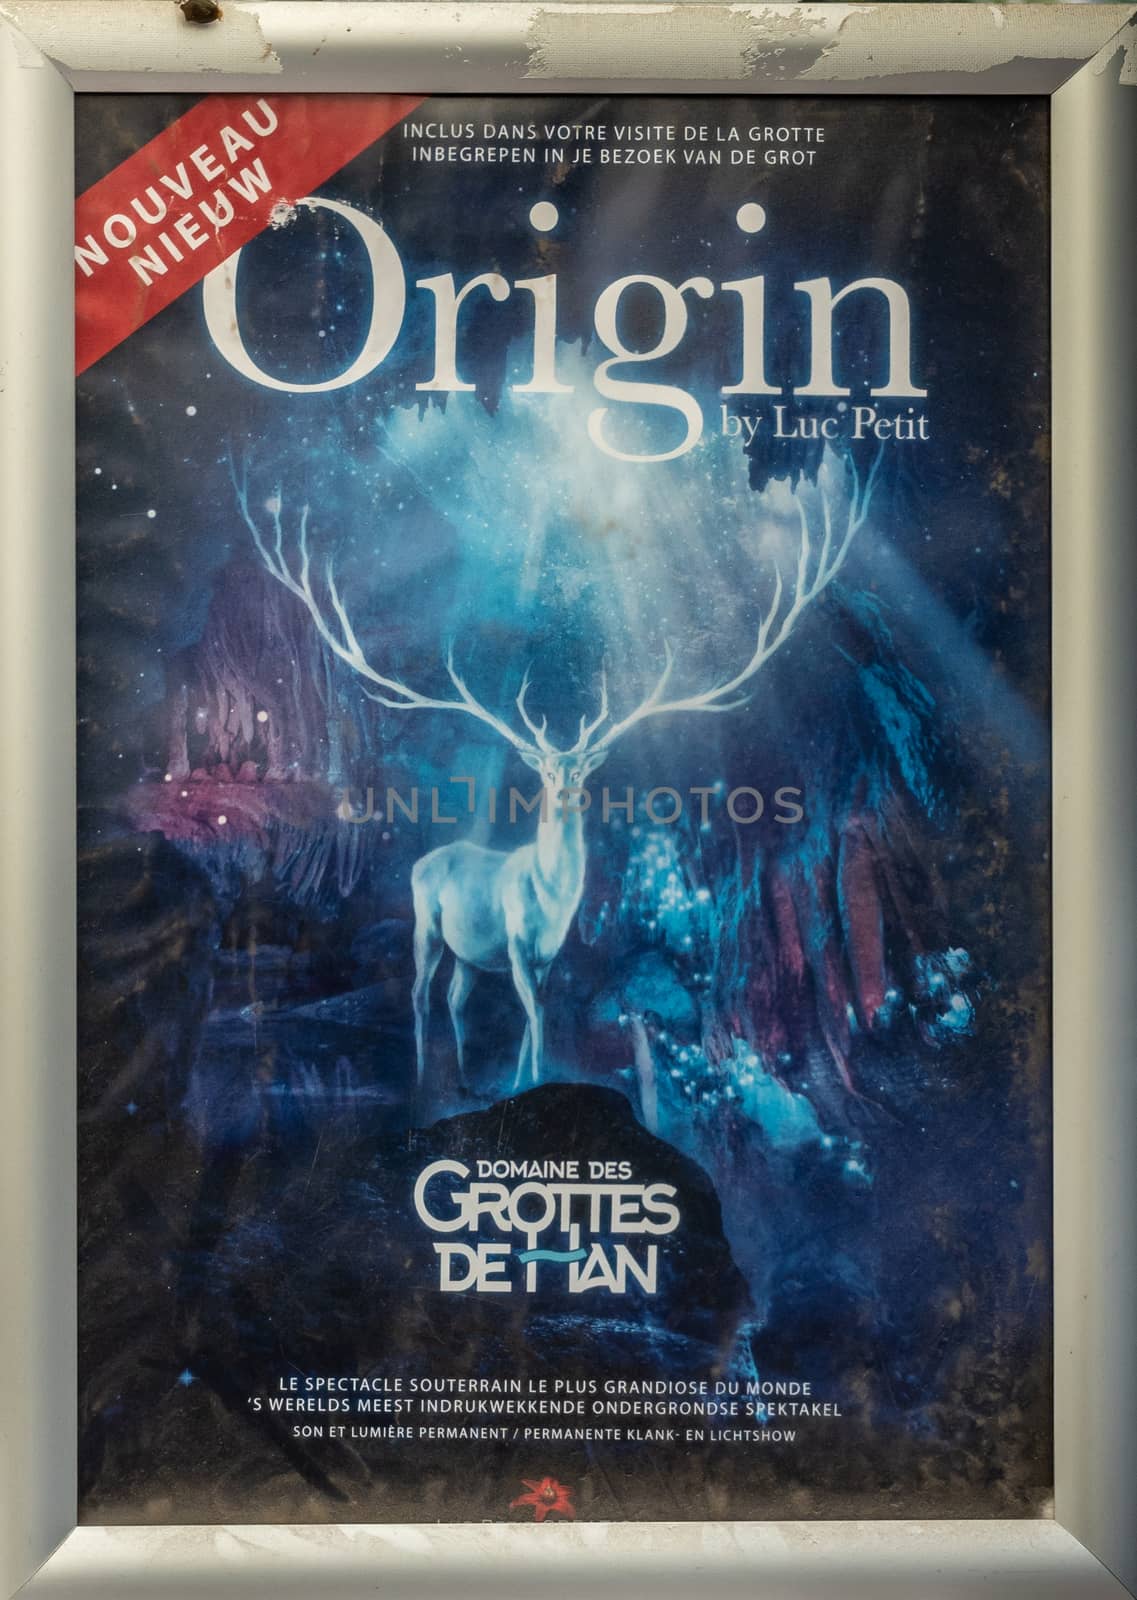 Han-sur-Lesse, Belgium - June 25, 2019: Grottes de Han poster and French and Dutch text. blue dominant, large deer in center, caves in back.